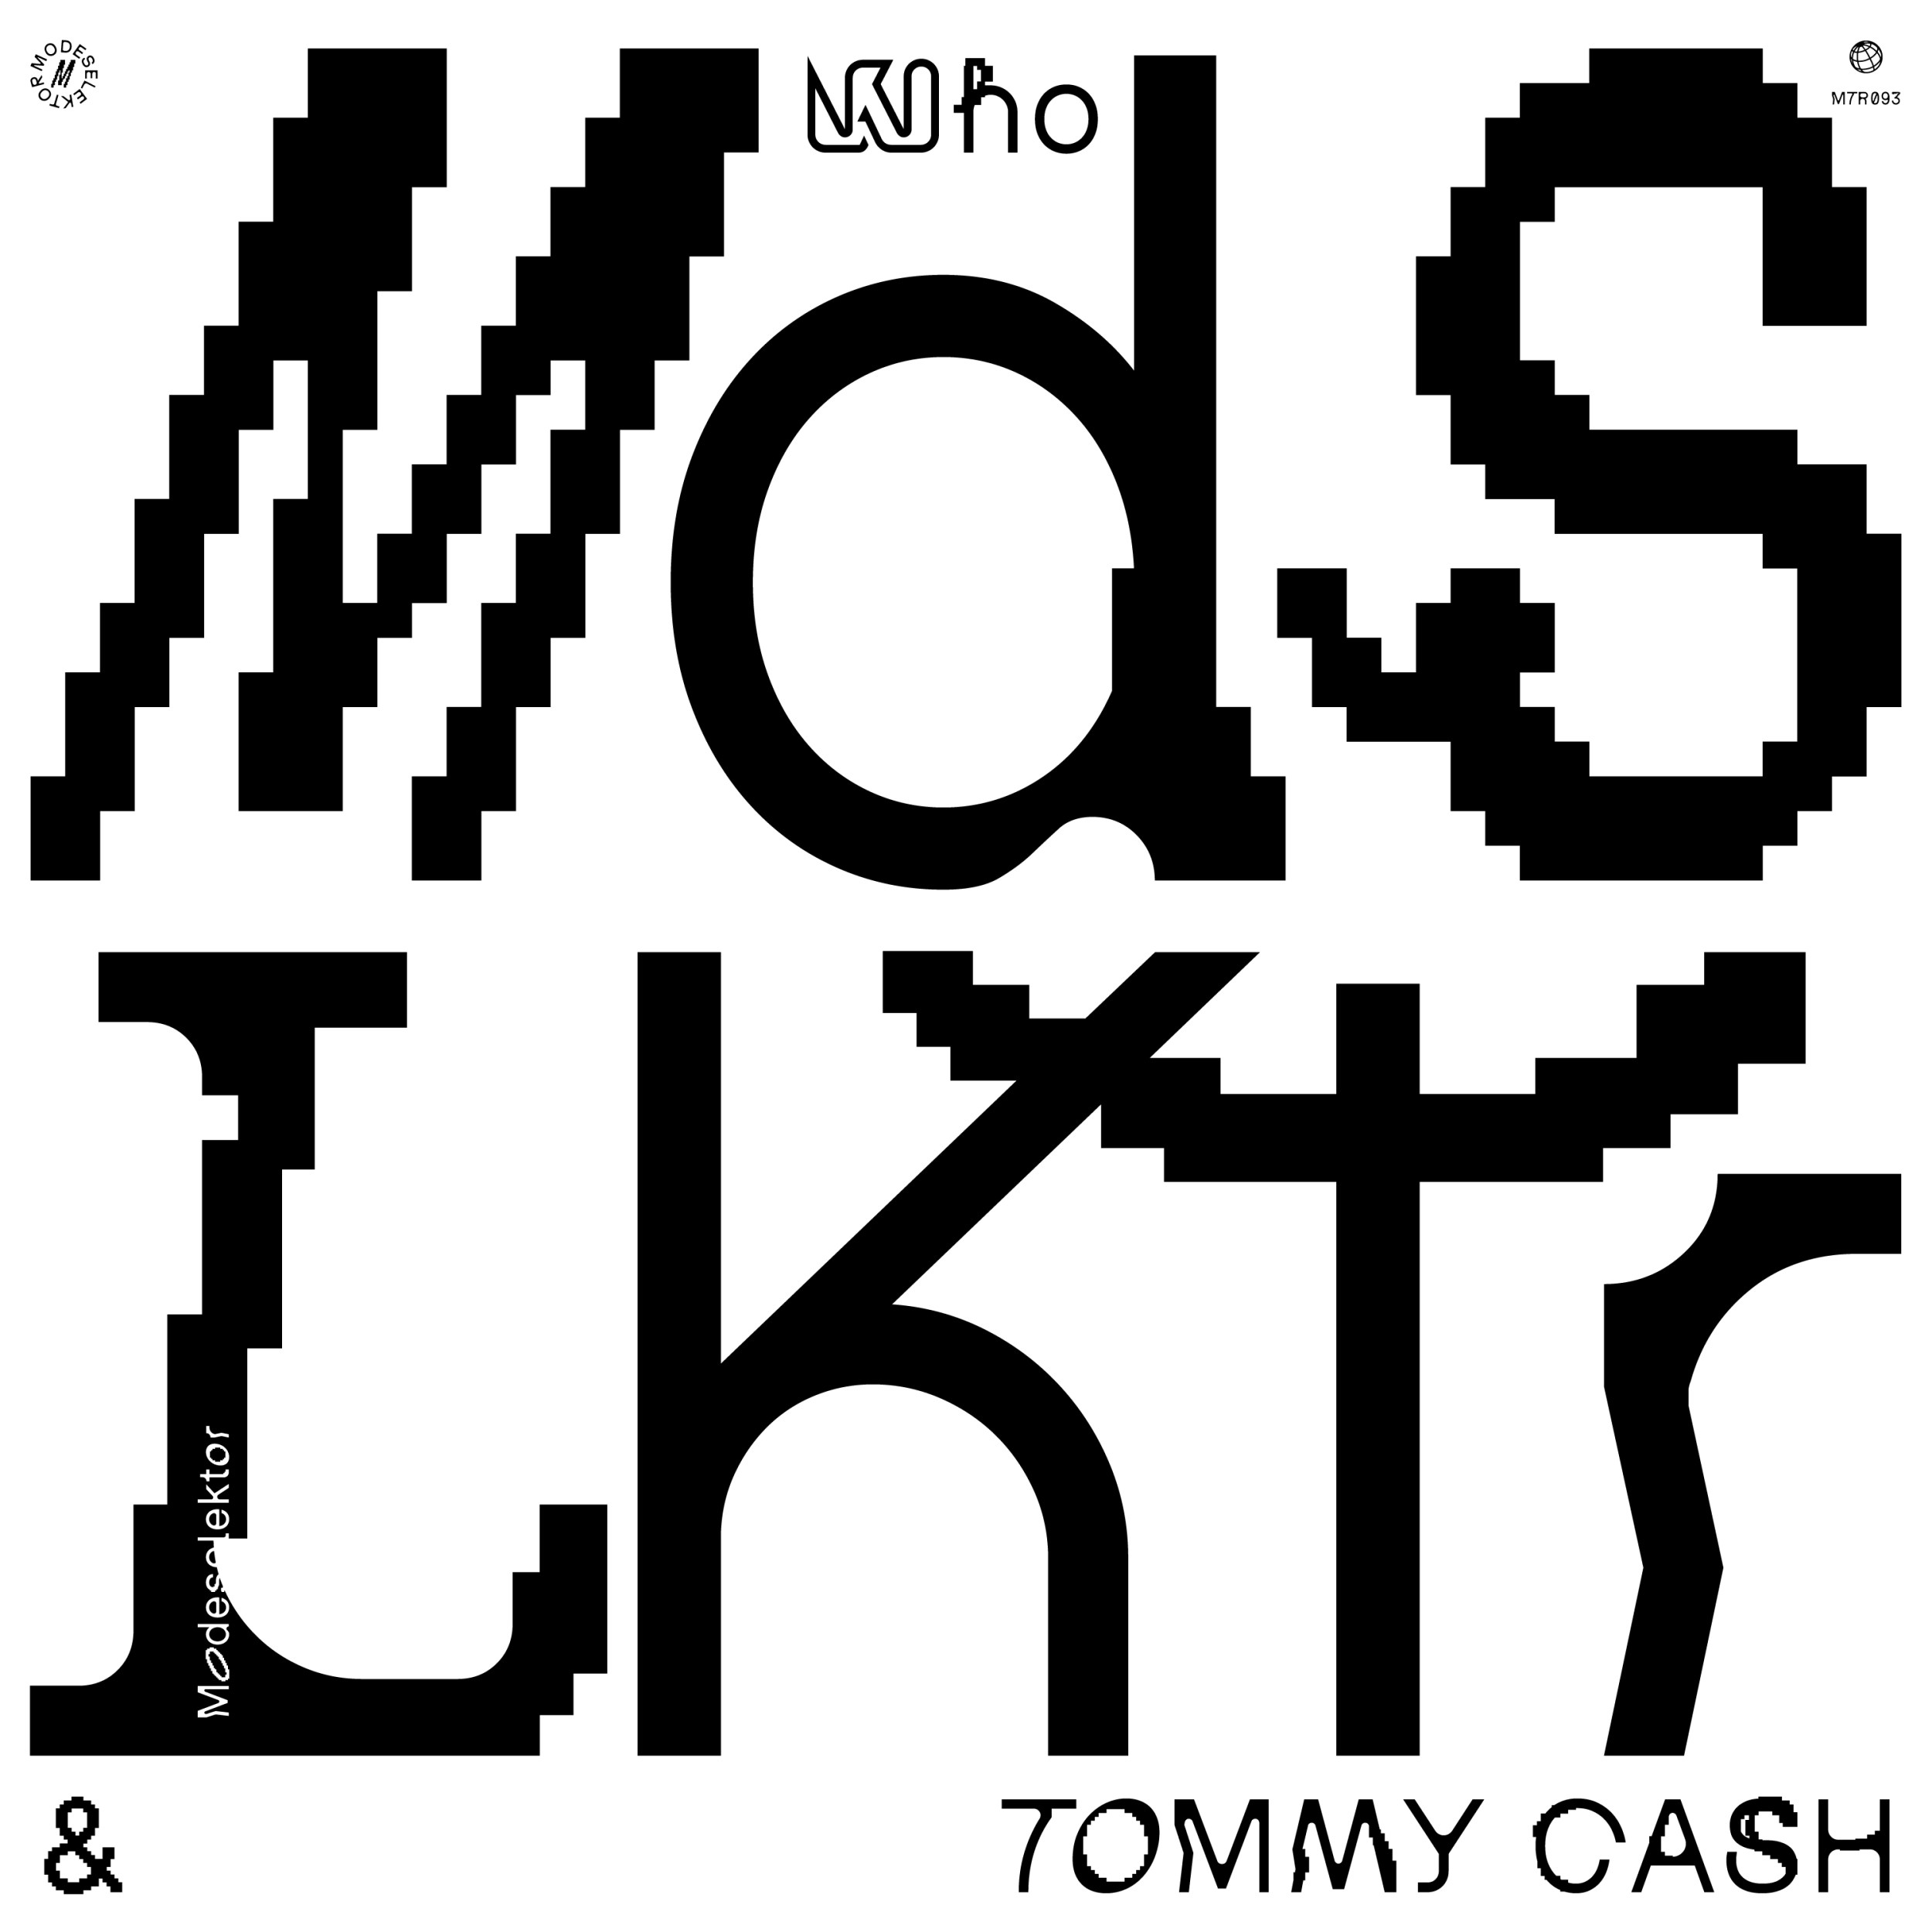 Modeselektor/Tommy Cash - Who (Picture Disk) - MTR093 - MONKEYTOWN RECORDS